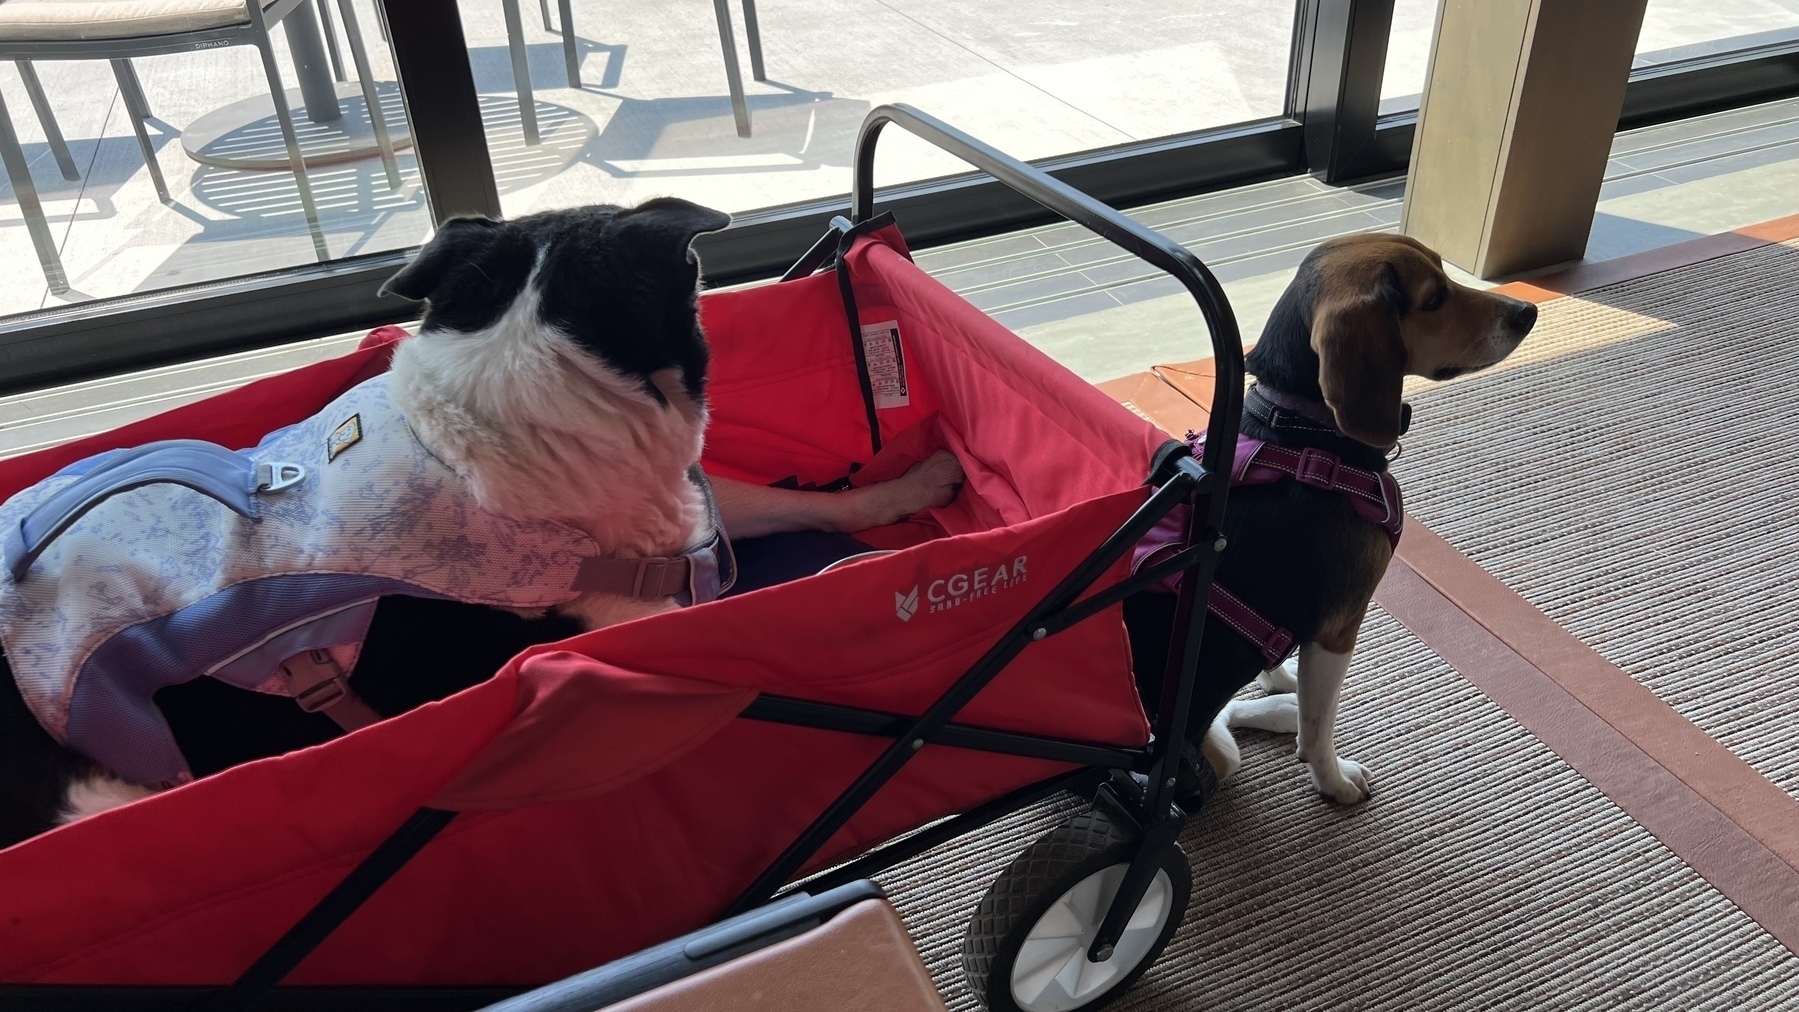 Elderly border collie in a red wagon and a beagle puppy standing sentry. 